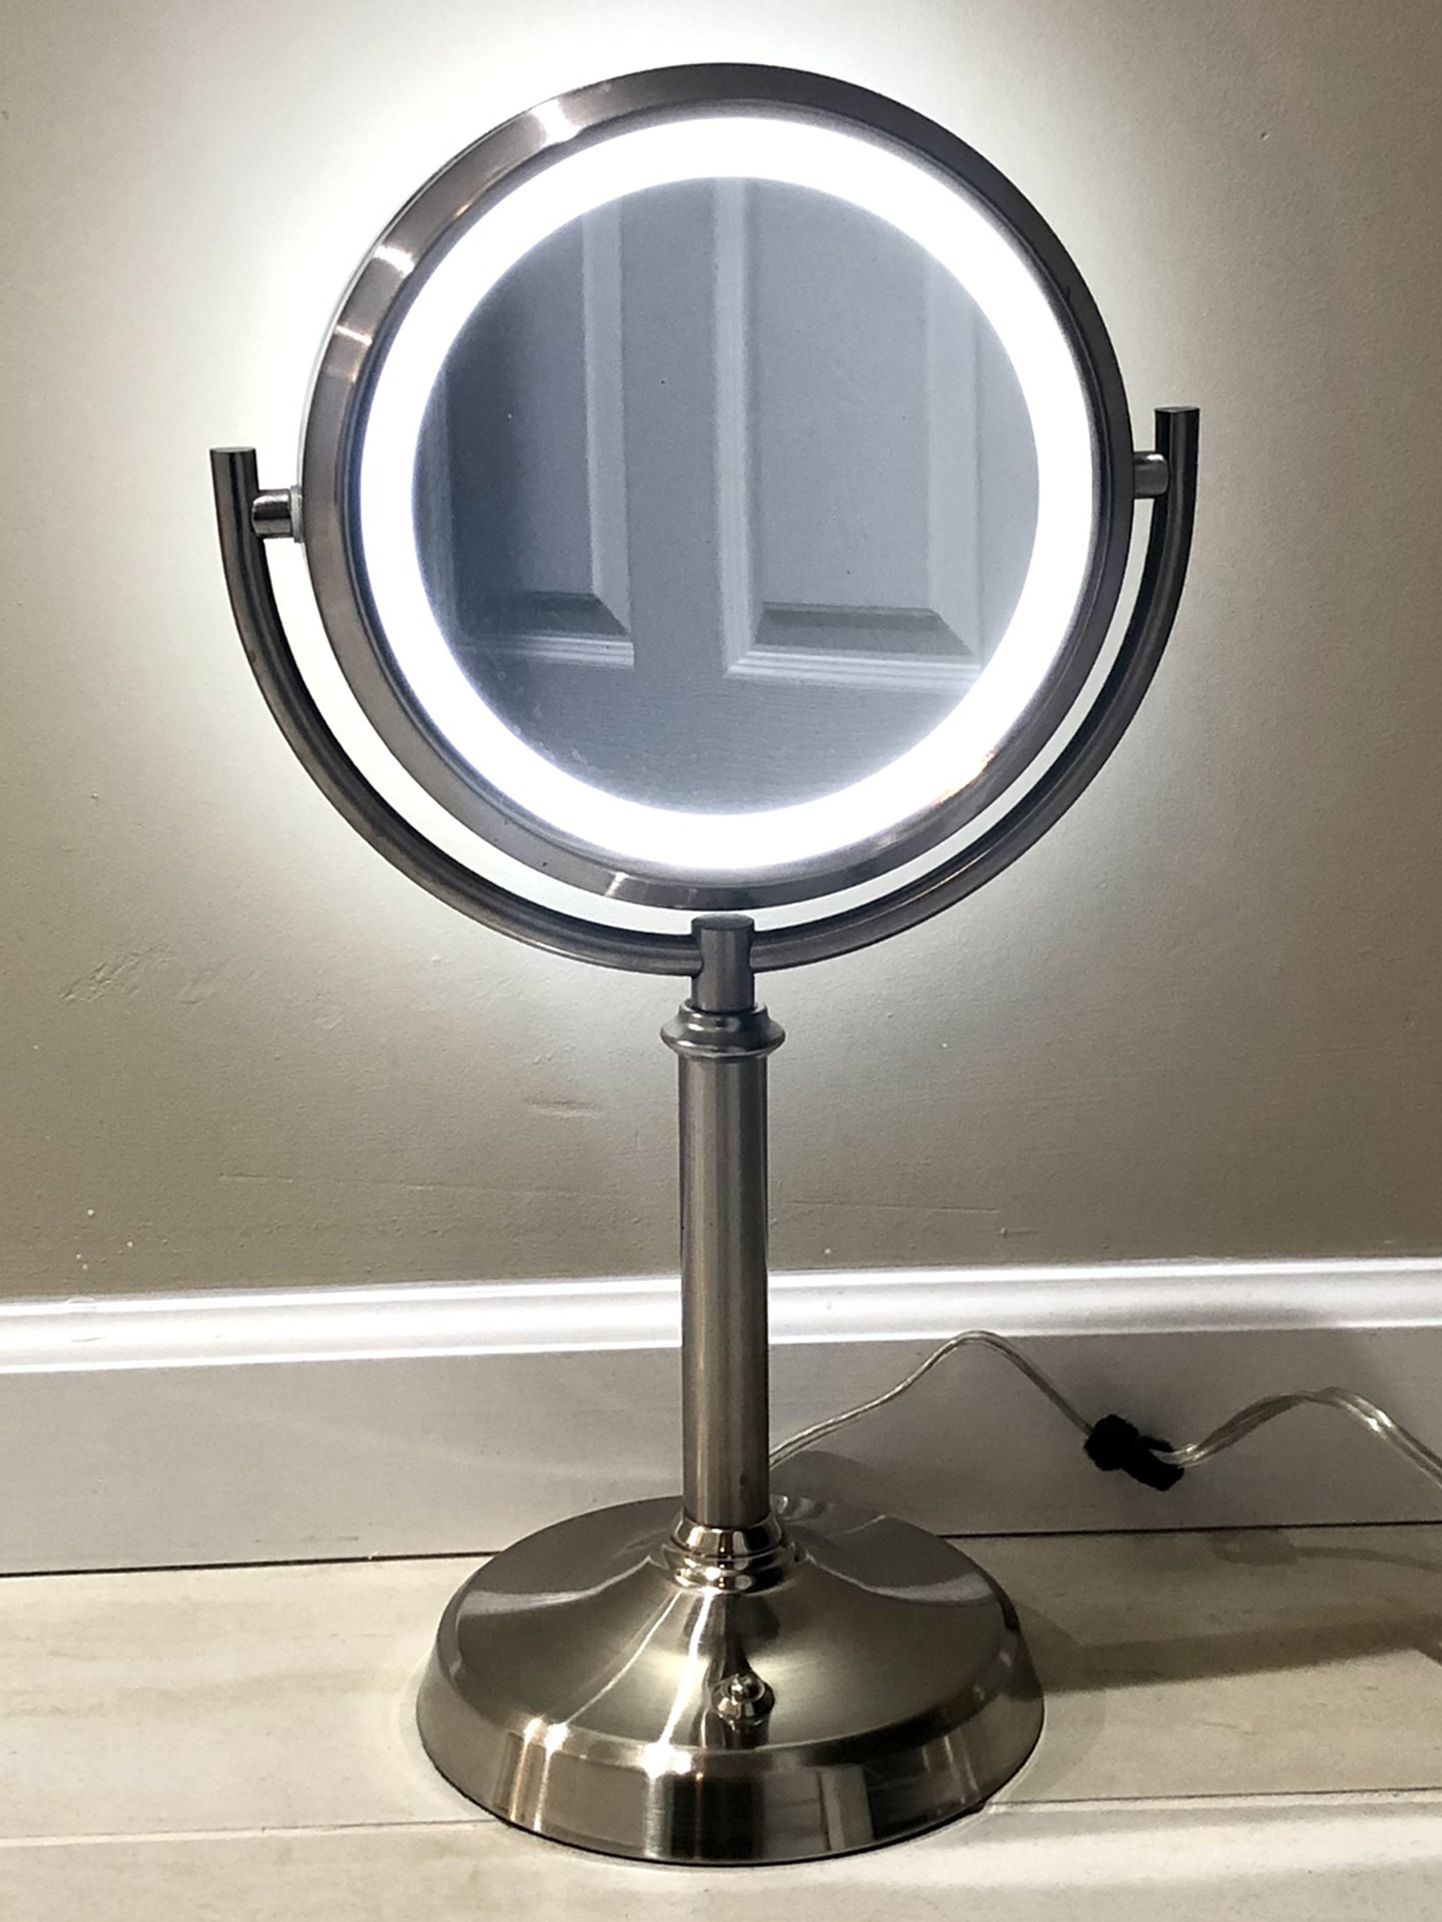 Professional 8.5" Lighted Makeup Mirror, 10X Magnifying Vanity Mirror with 32 Medical LED Lights, Senior Pearl Nickel Cosmetic Mirror,Brightness